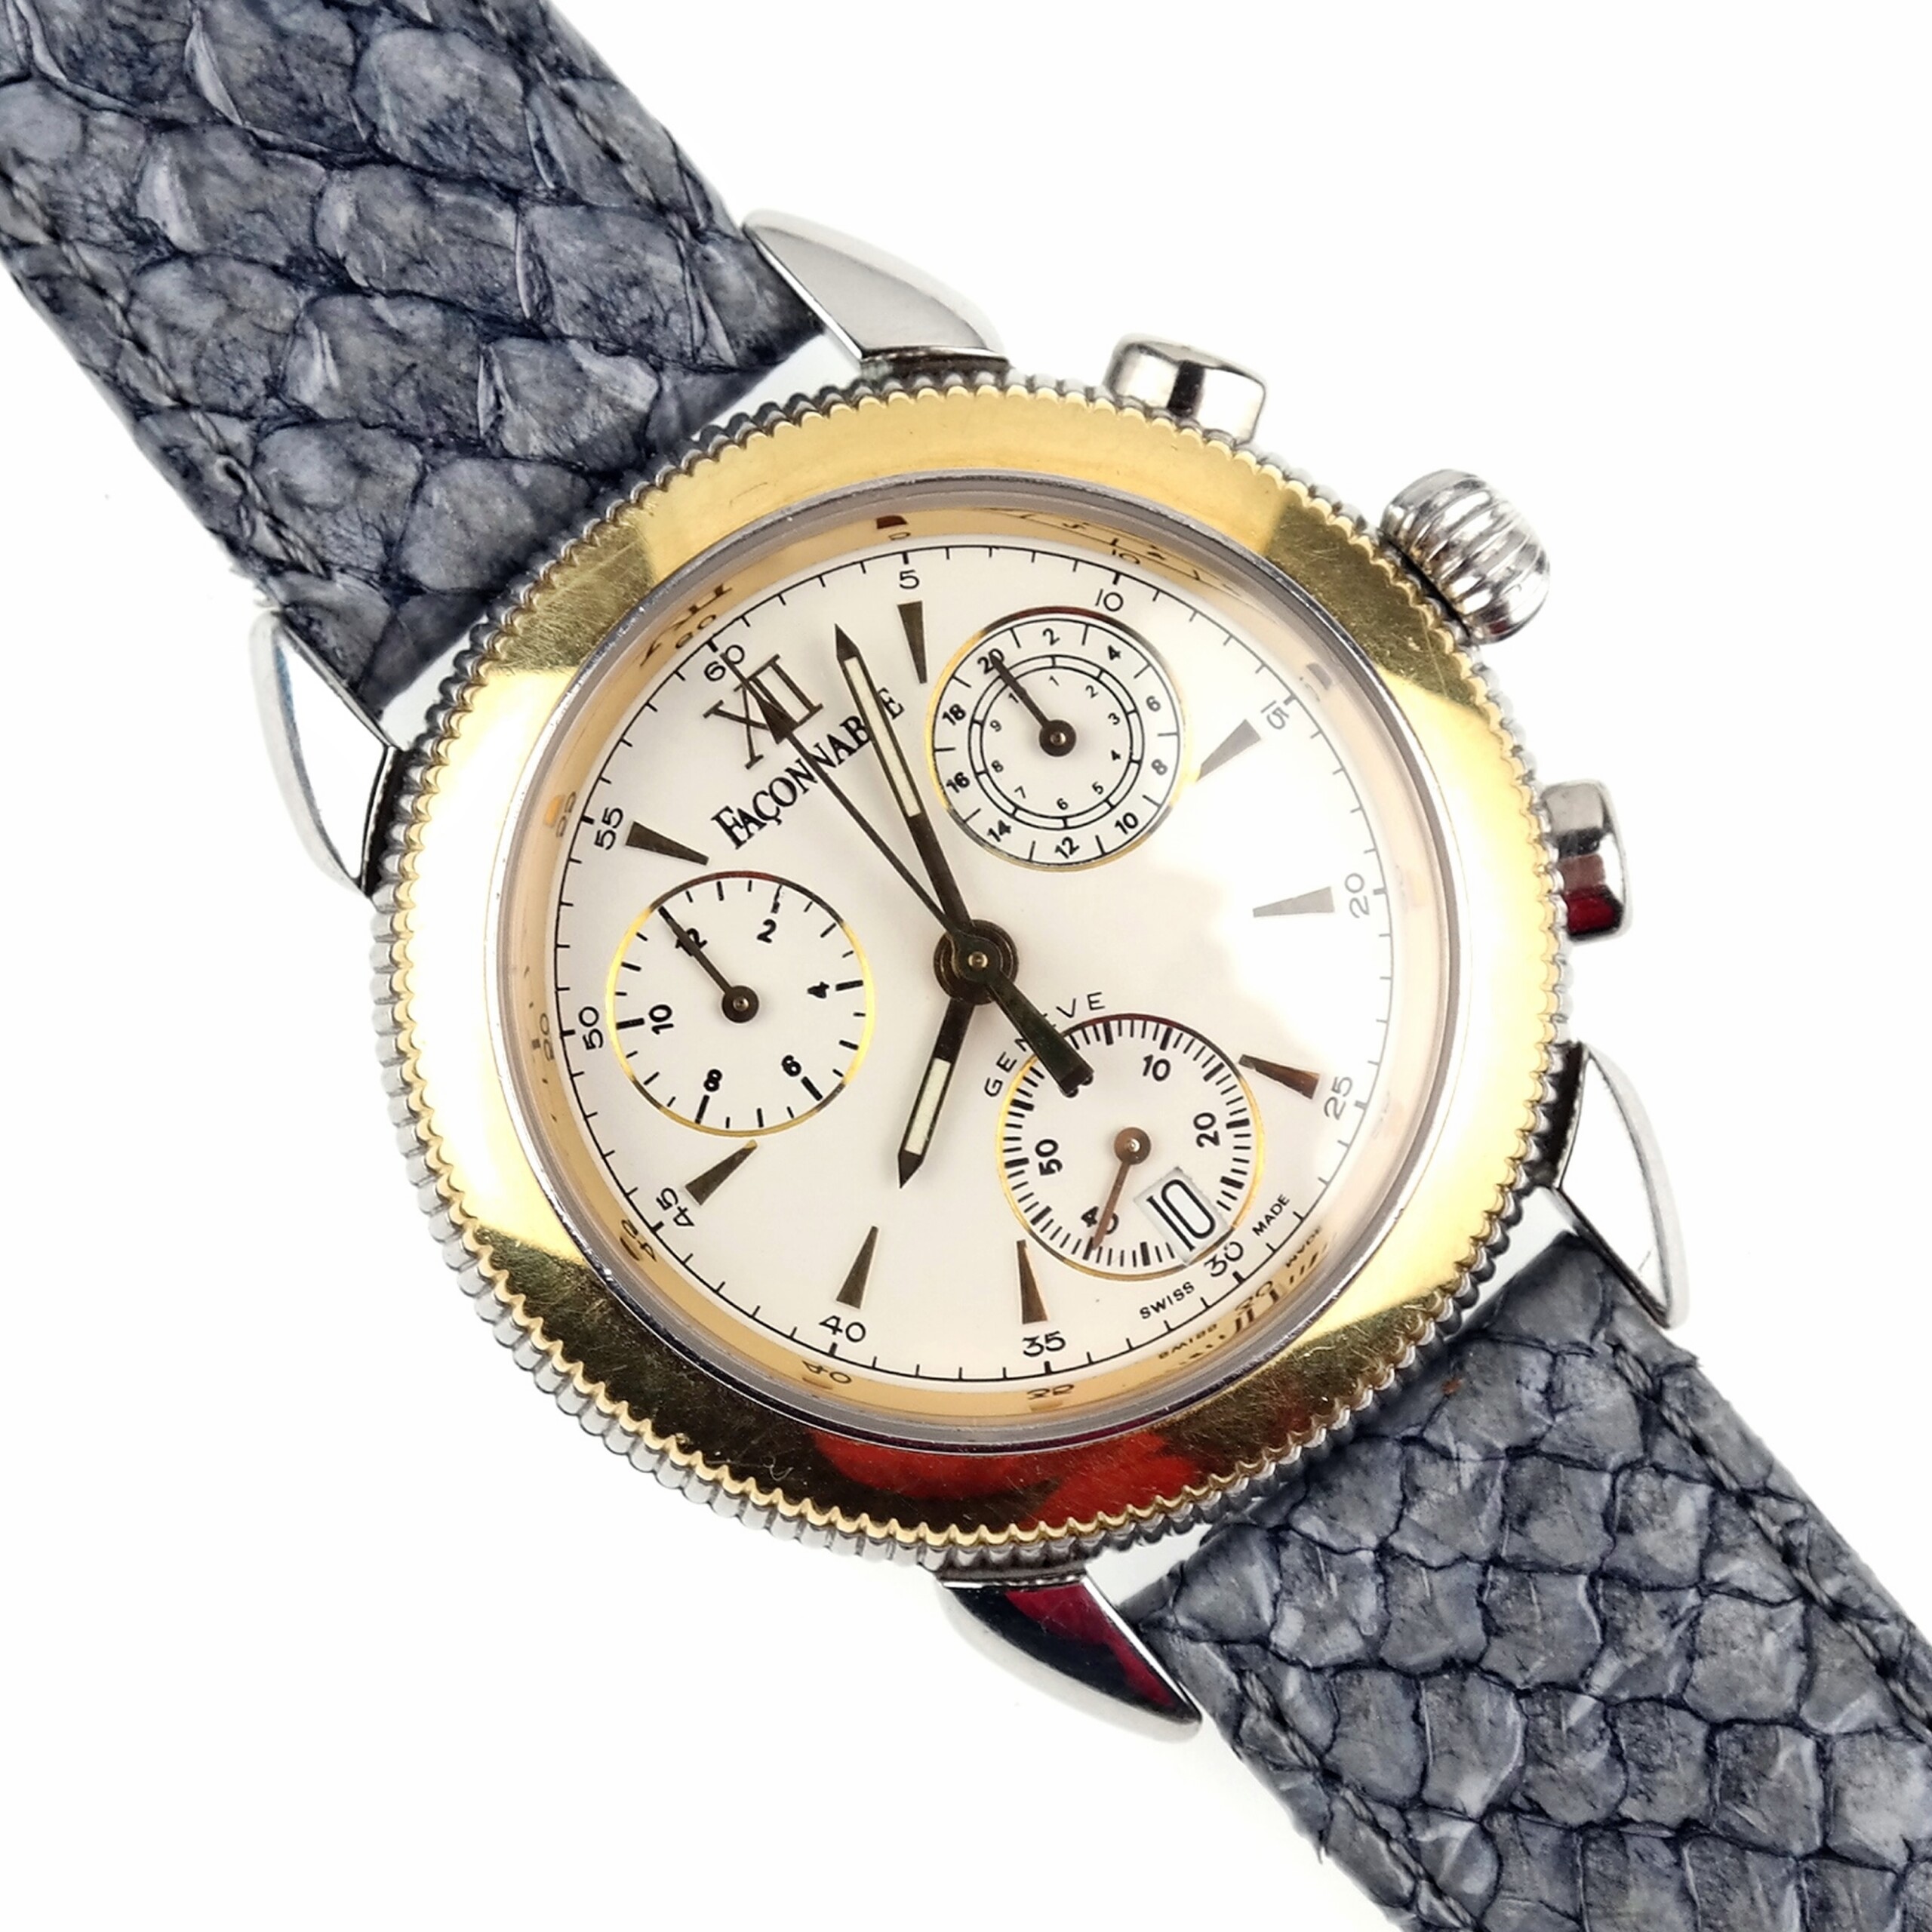 FACONNABLE - Geneve -  Swiss Made 251-262 Chronograph Split-Timer Watch